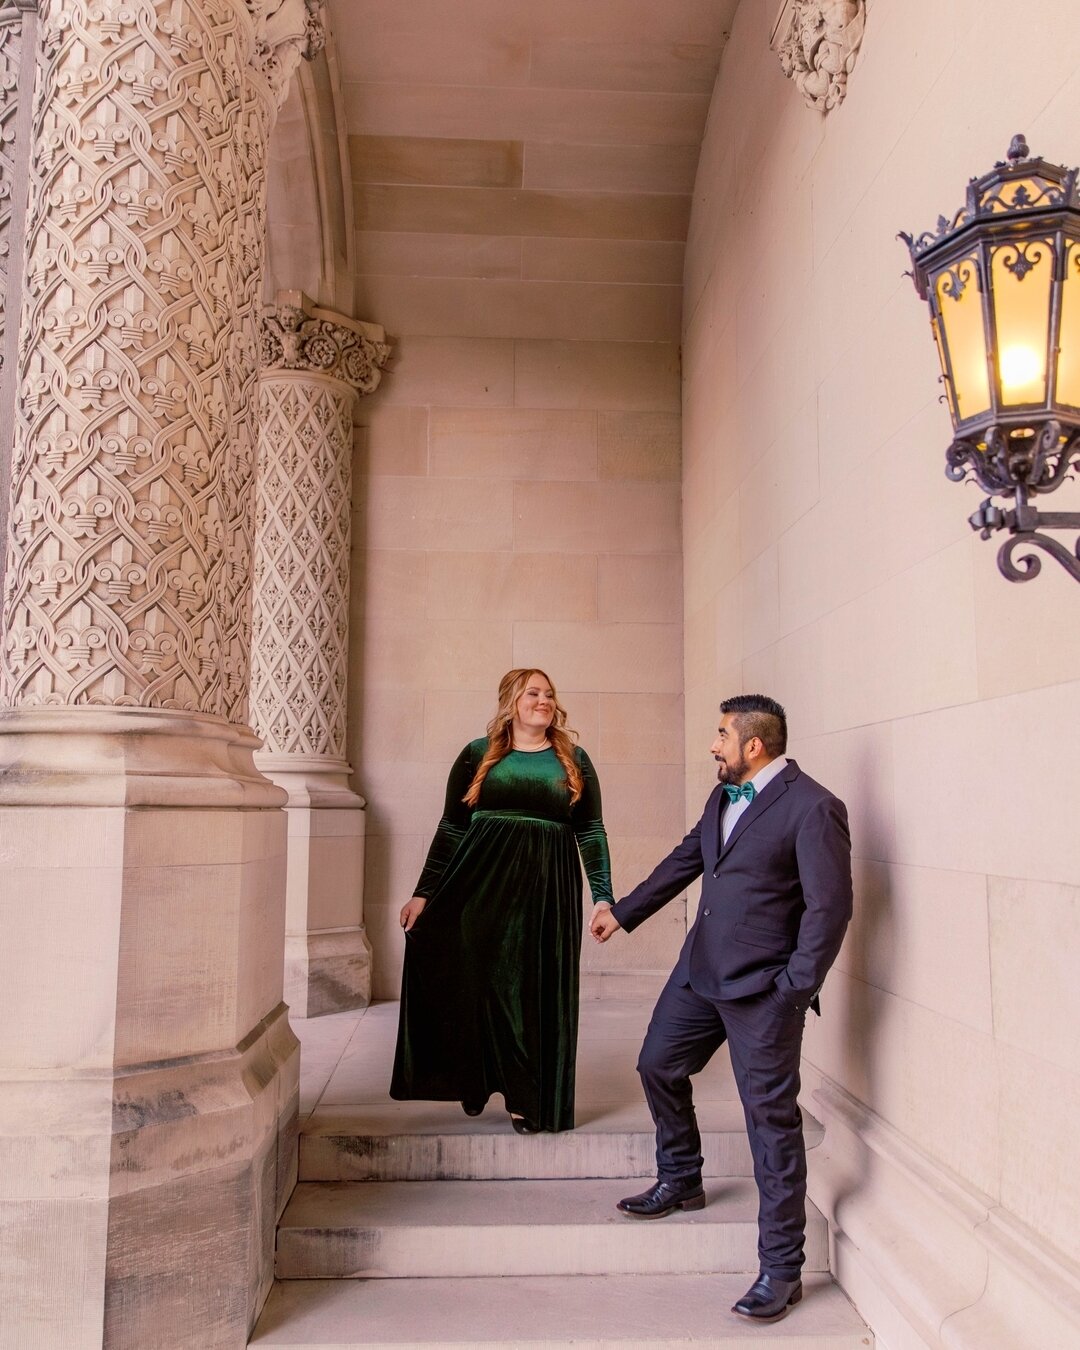 Faith &amp; Gustavo - this session makes my little creative heart SO happy! Fun fact, green is my favorite color...so when she told me she was wearing a VELVET green dress? Say less, I'm sold 🤌🏼🔥